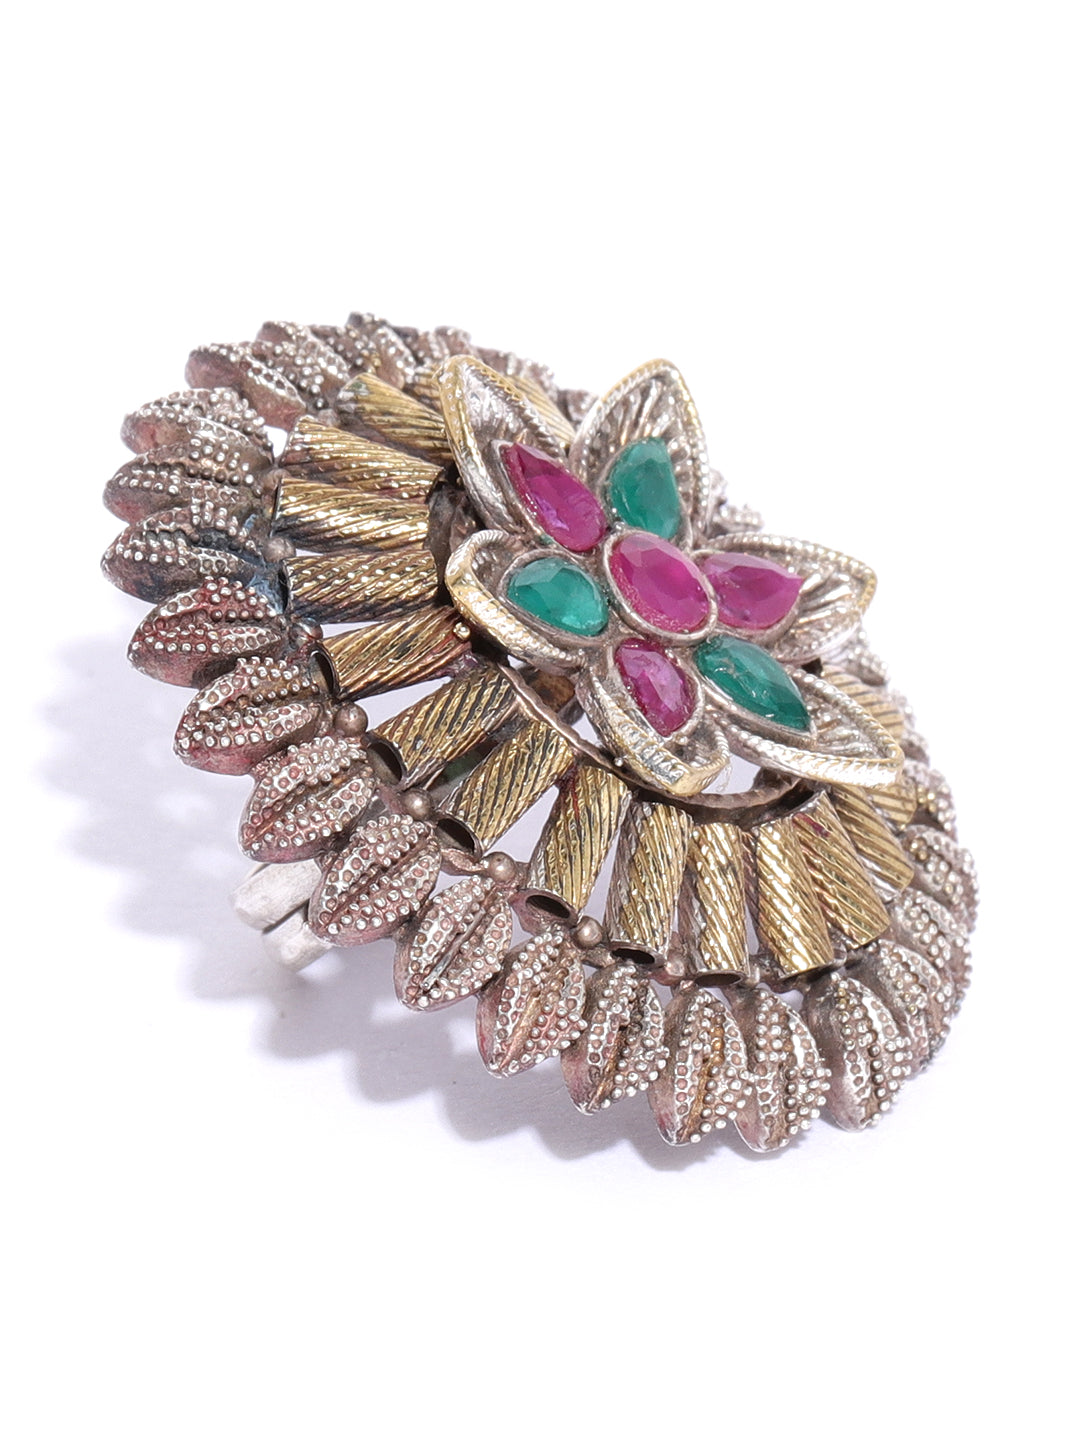 Oxidized Dual-Toned Ruby and Emerald Studded Adjustable Ring in Floral Pattern